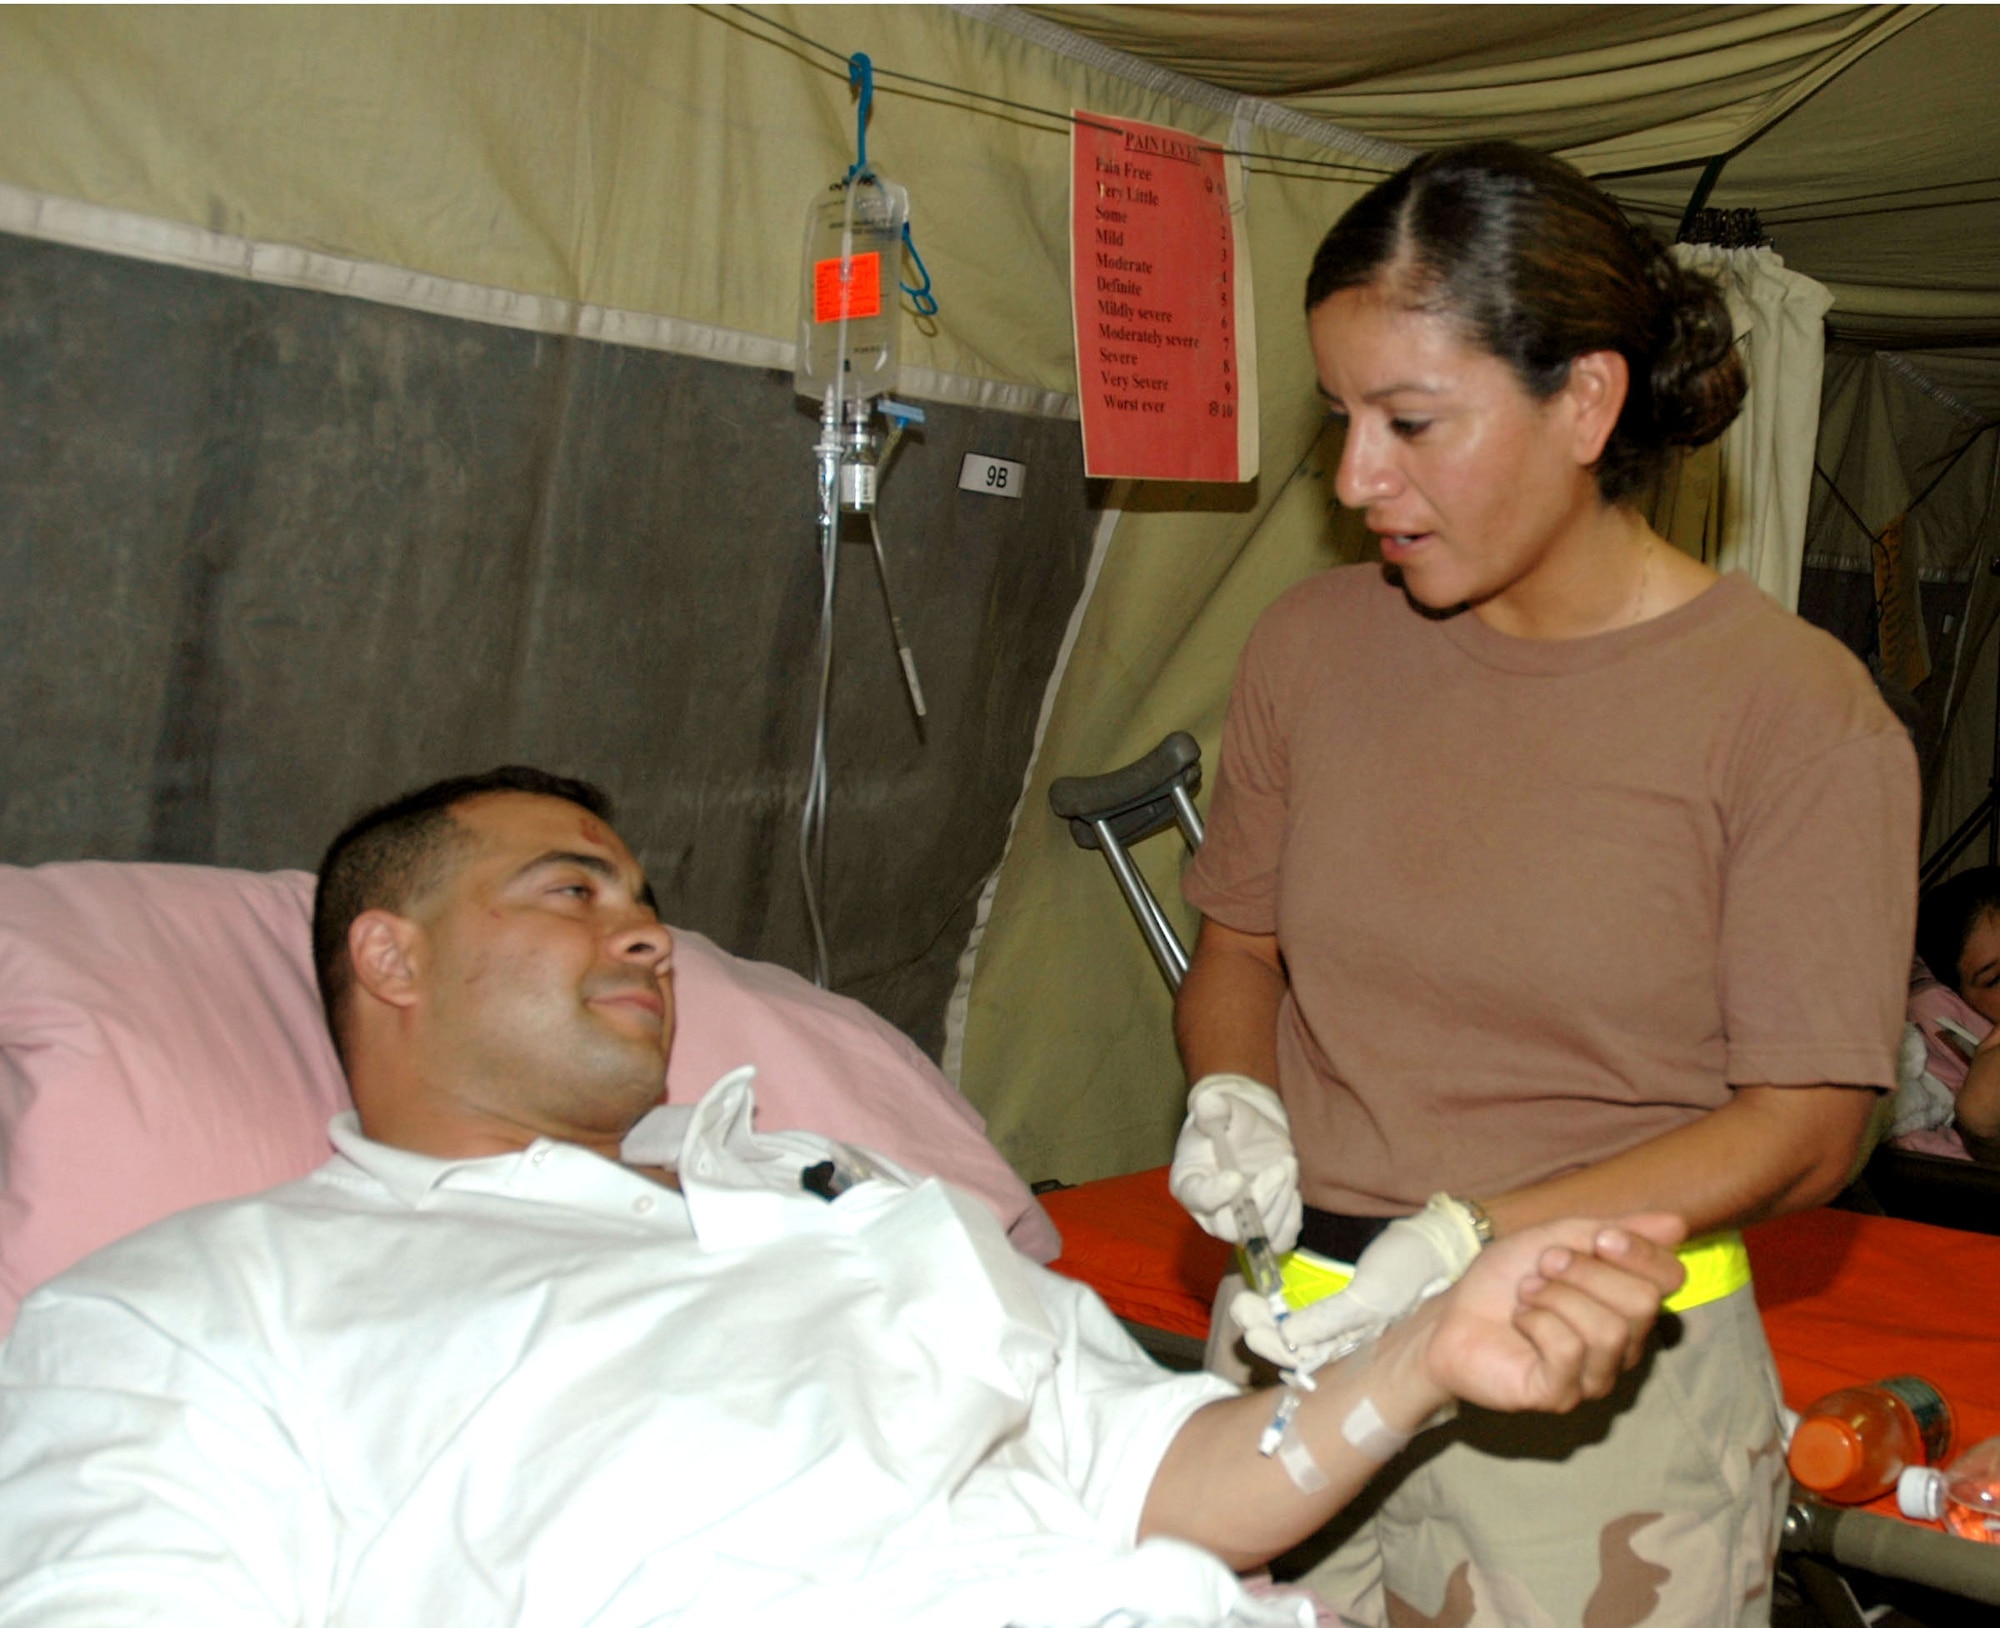 BALAD AIR BASE, Iraq -- Second Lt. Maria Sanchez cares for a patient at the 332nd Expeditionary Medical Group's contingency aeromedical staging facility.  She and the other doctors, nurses and technicians with the facility strive to ensure their patients are as comfortable as possible before being transported to Germany.  Lieutenant Sanchez is deployed from the 81st Medical Surgical Squadron at Keesler Air Force Base, Miss.  (U.S. Air Force photo by Senior Airman Chawntain Sloan)